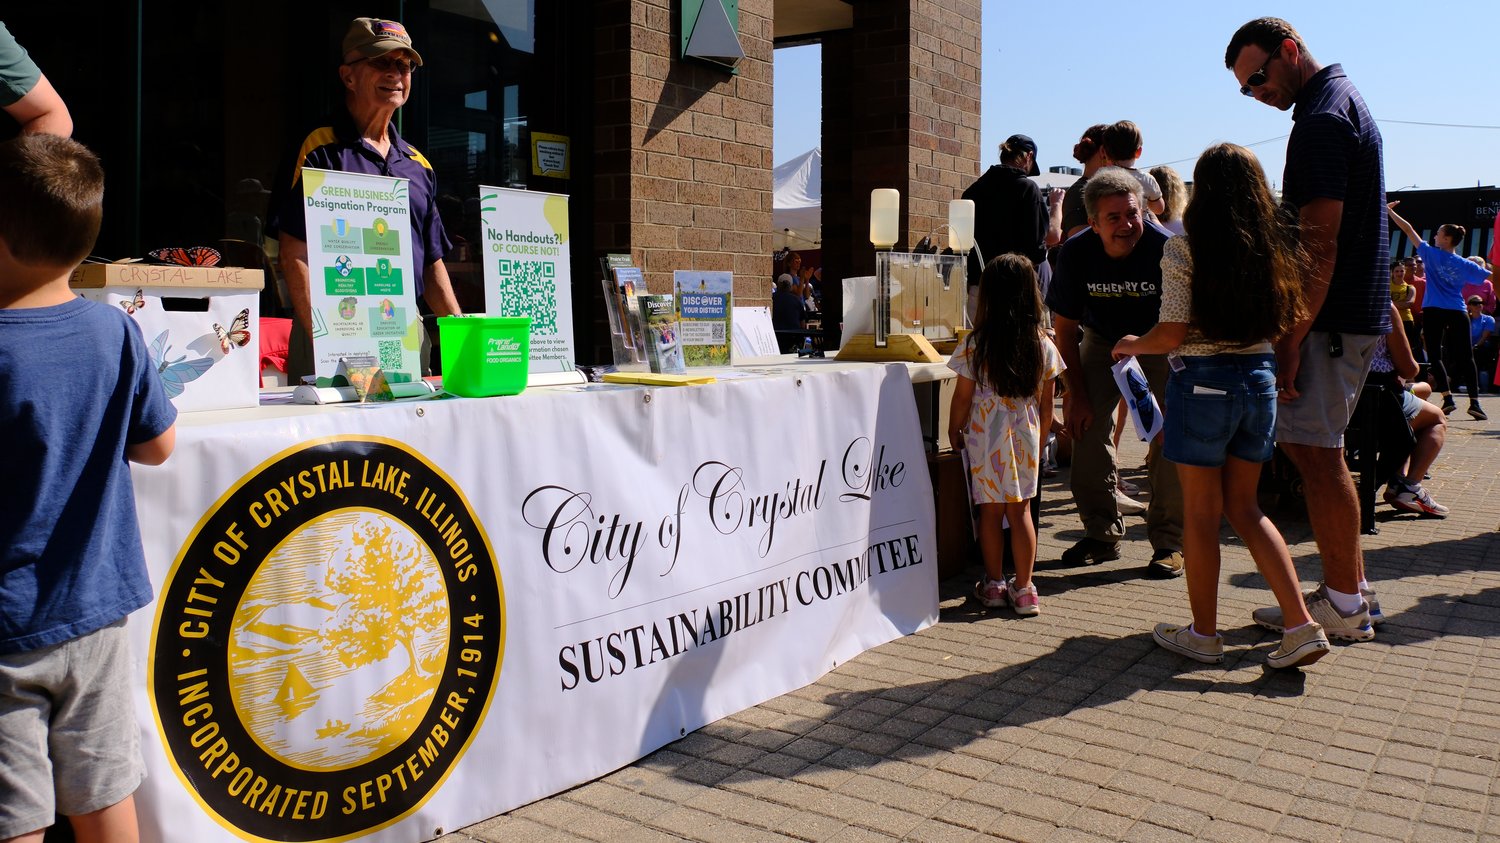 City of Crystal Lake Sustainable Committee educating.